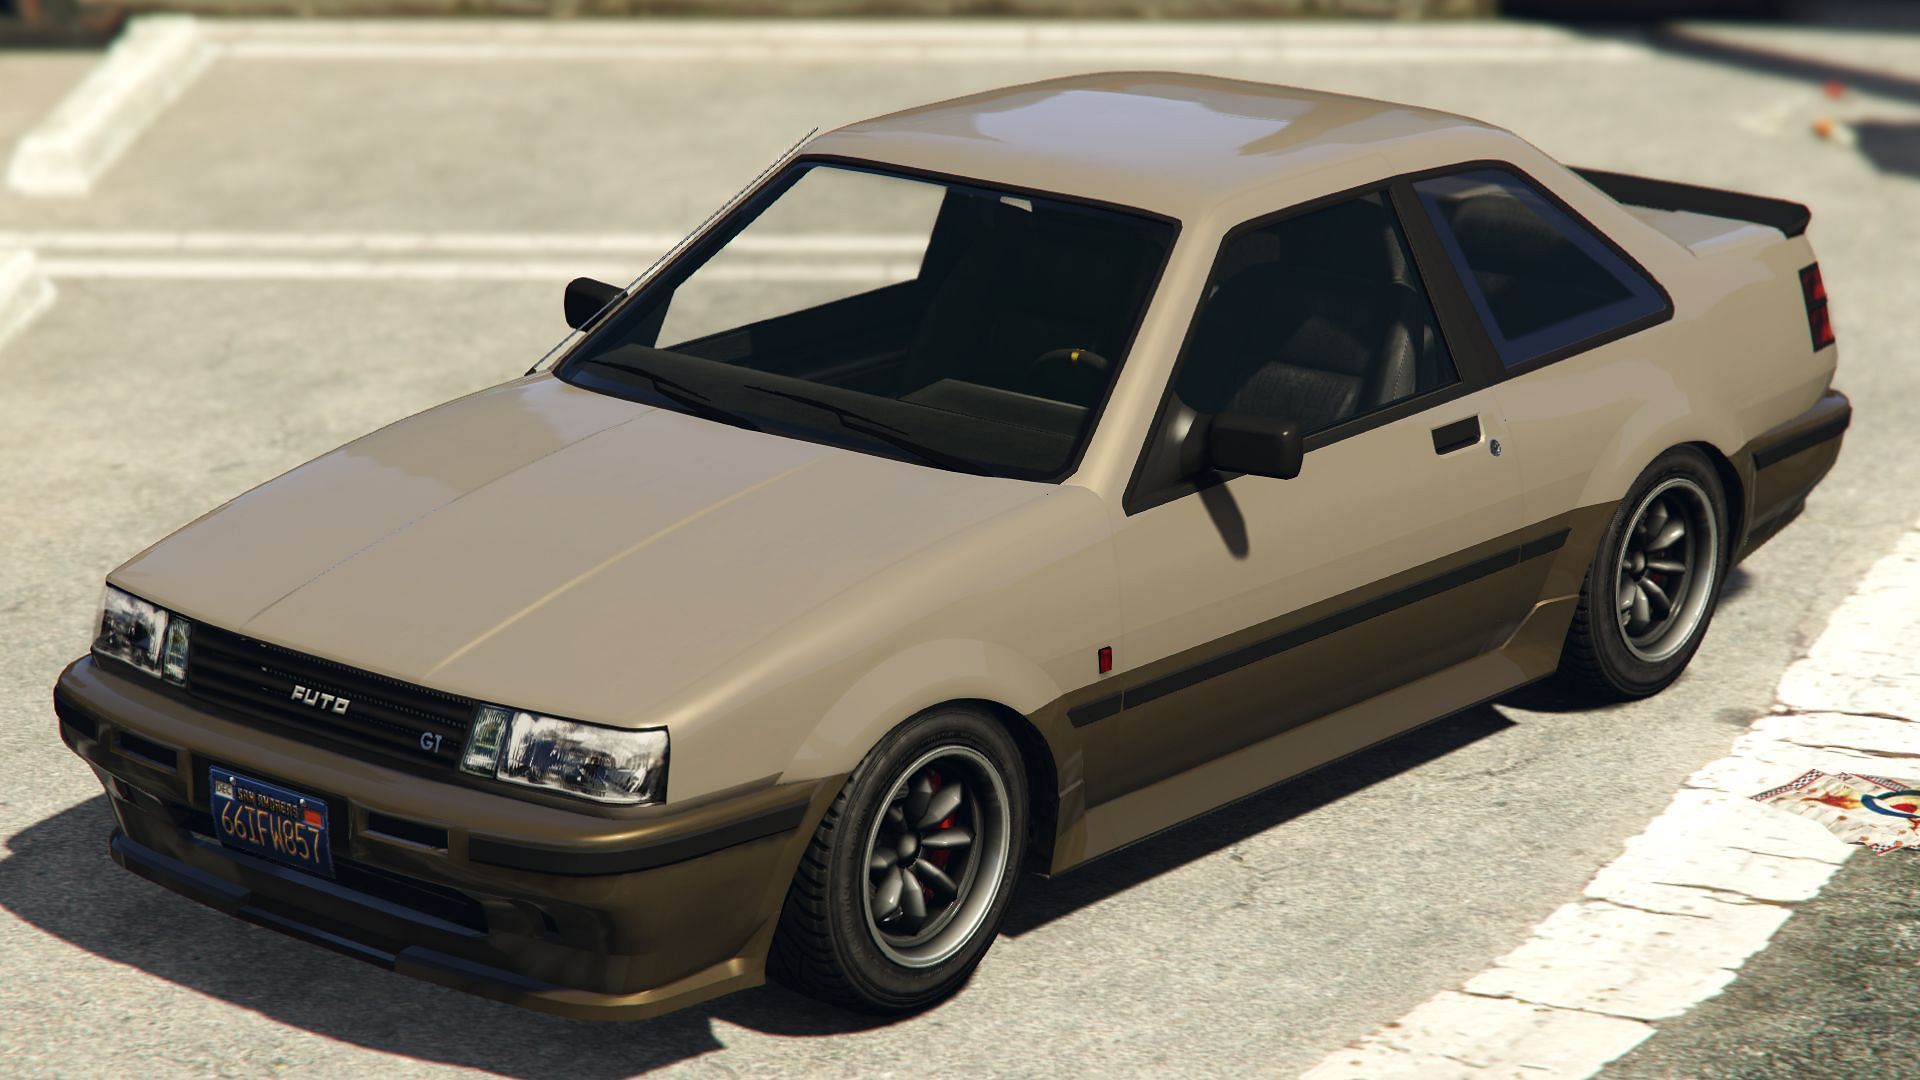 The Karin Futo is one of the oldest GTA Online cars (Image via GTA Wiki)